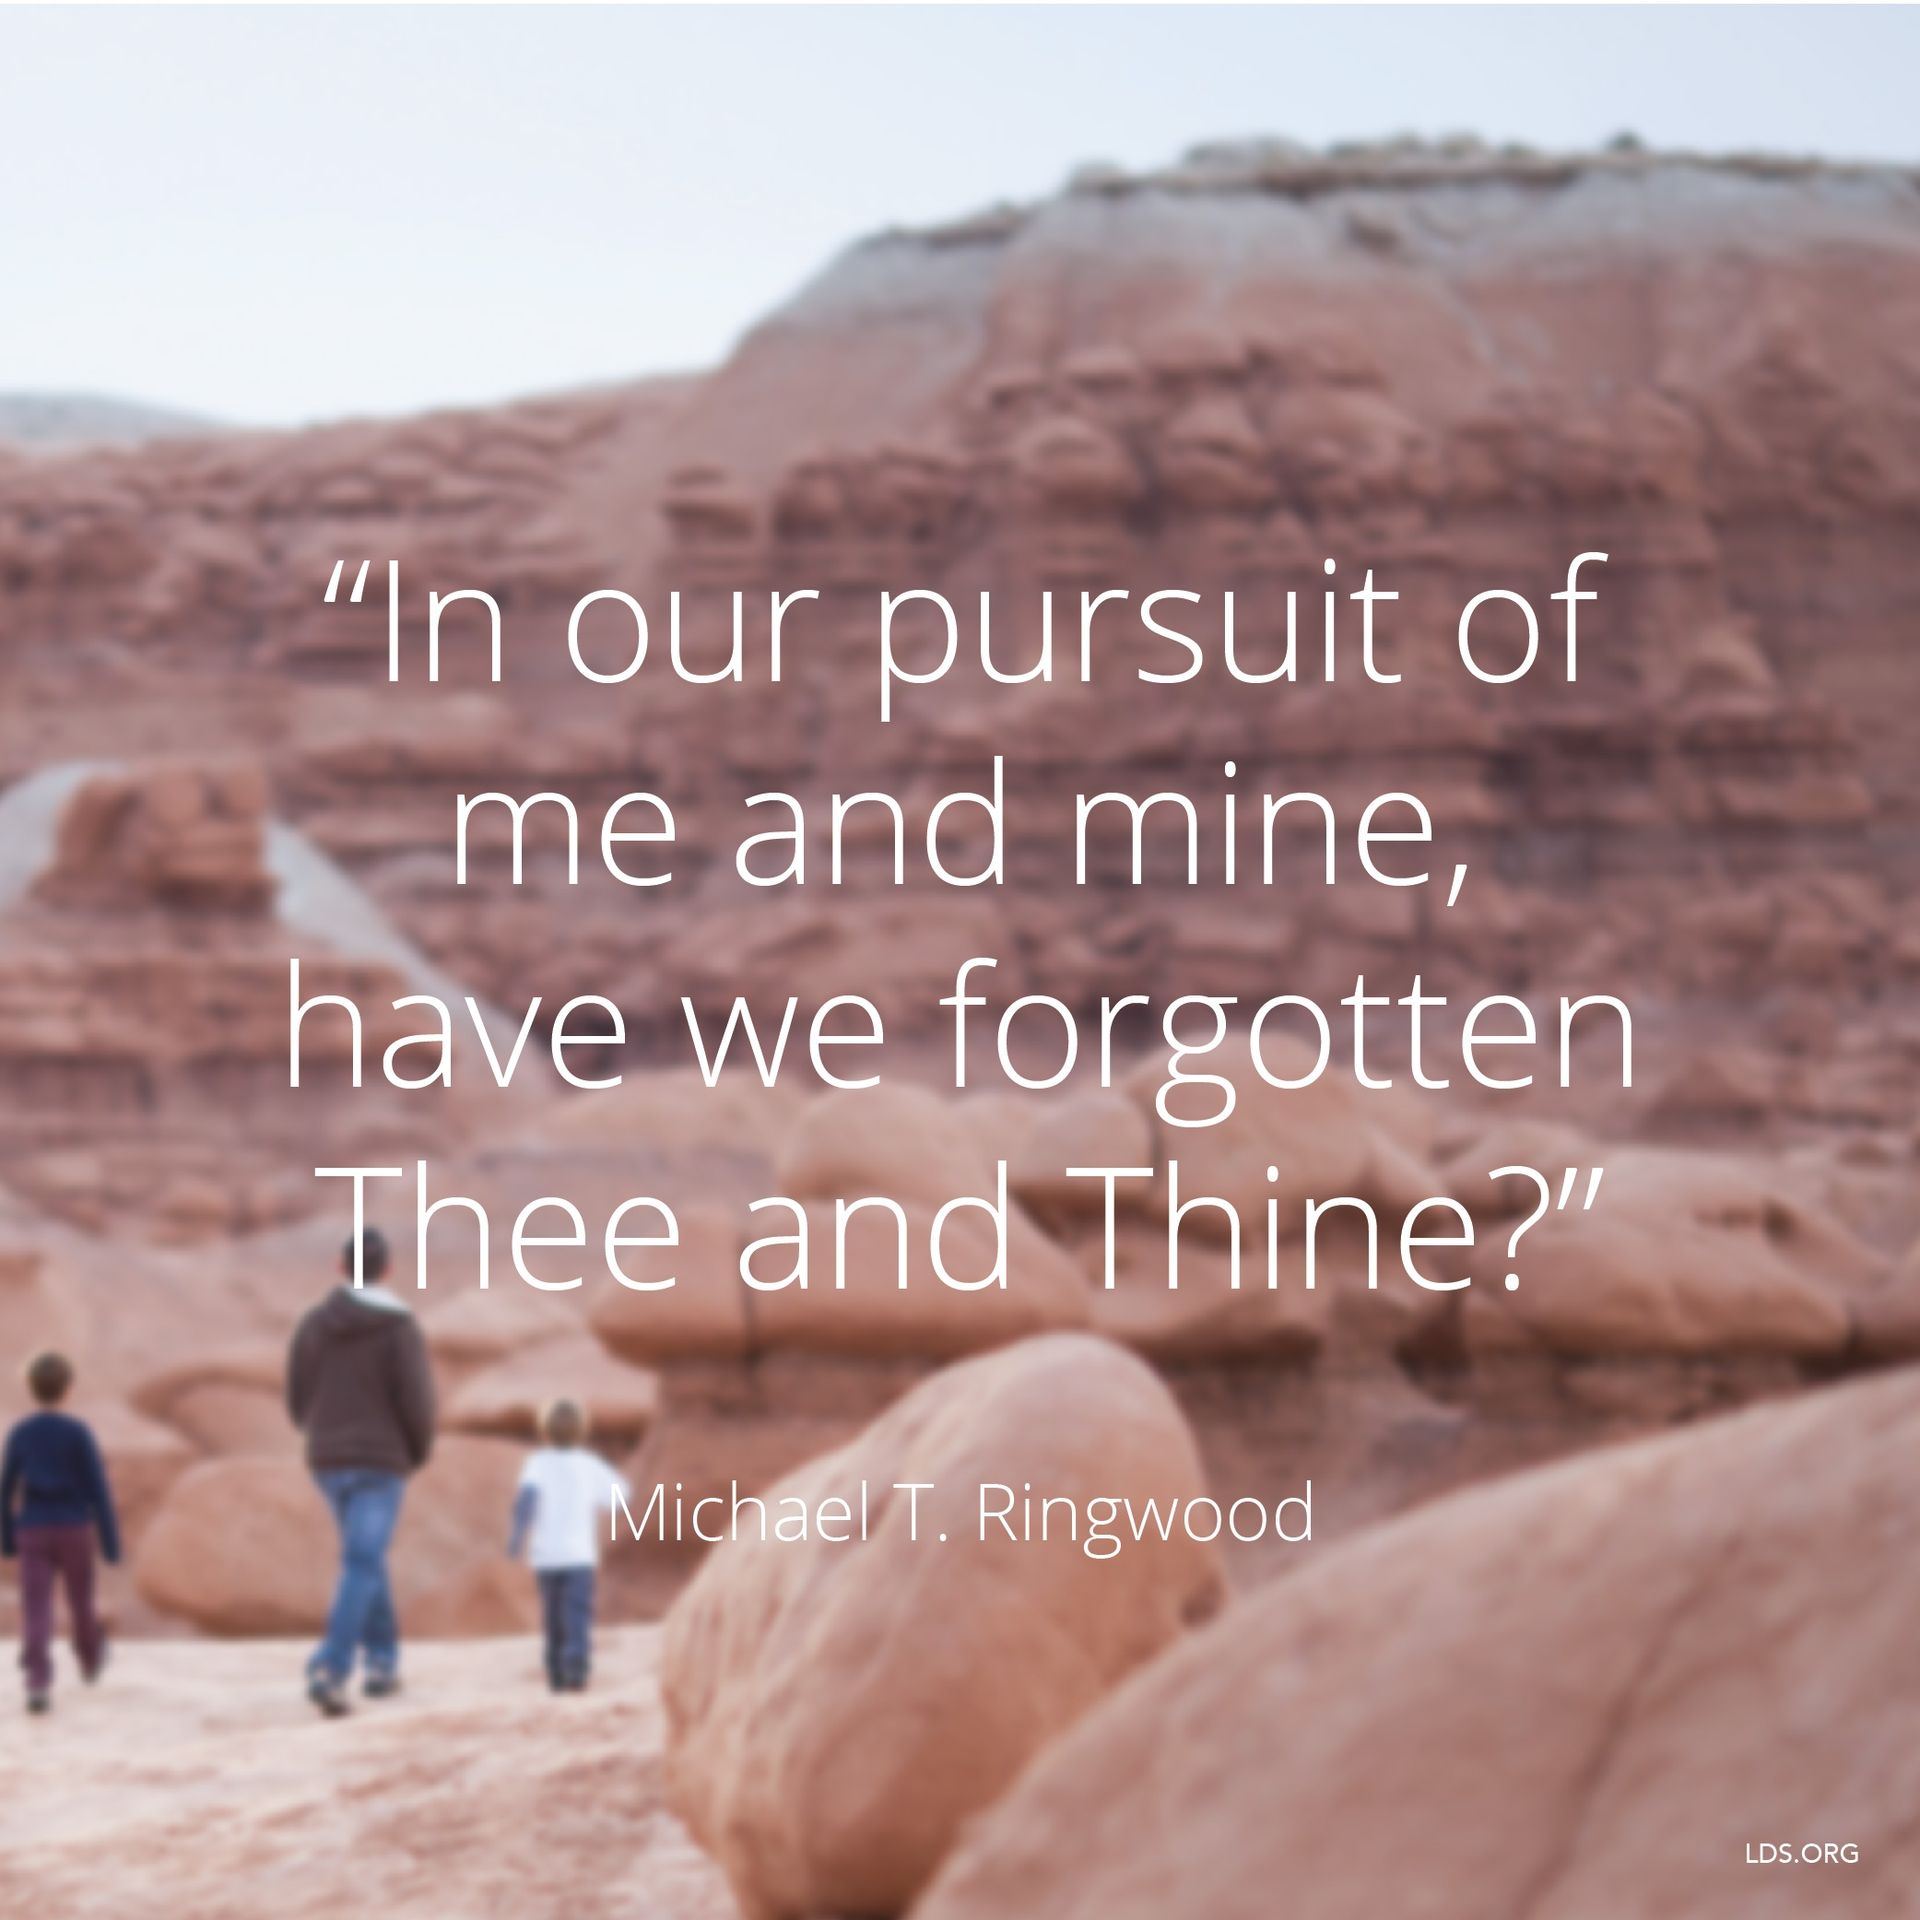 “In our pursuit of me and mine, have we forgotten Thee and Thine?”—Elder Michael T. Ringwood, “Truly Good and without Guile” © undefined ipCode 1.